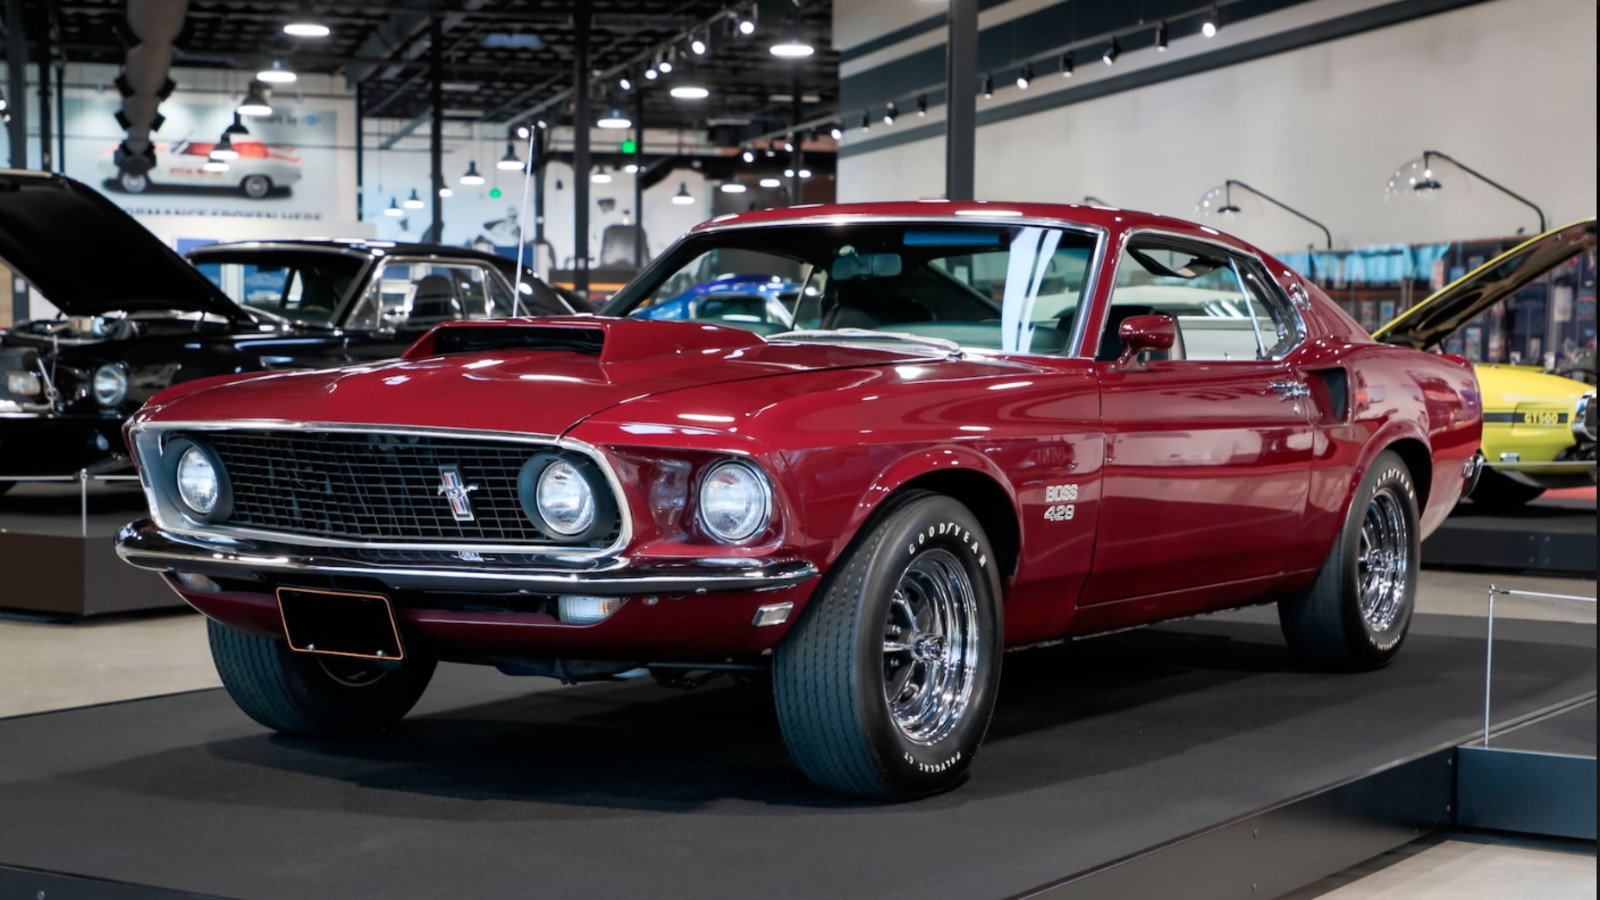 Immaculate 1969 Mustang Boss 429 Fastback Up For Grabs Themustangsource